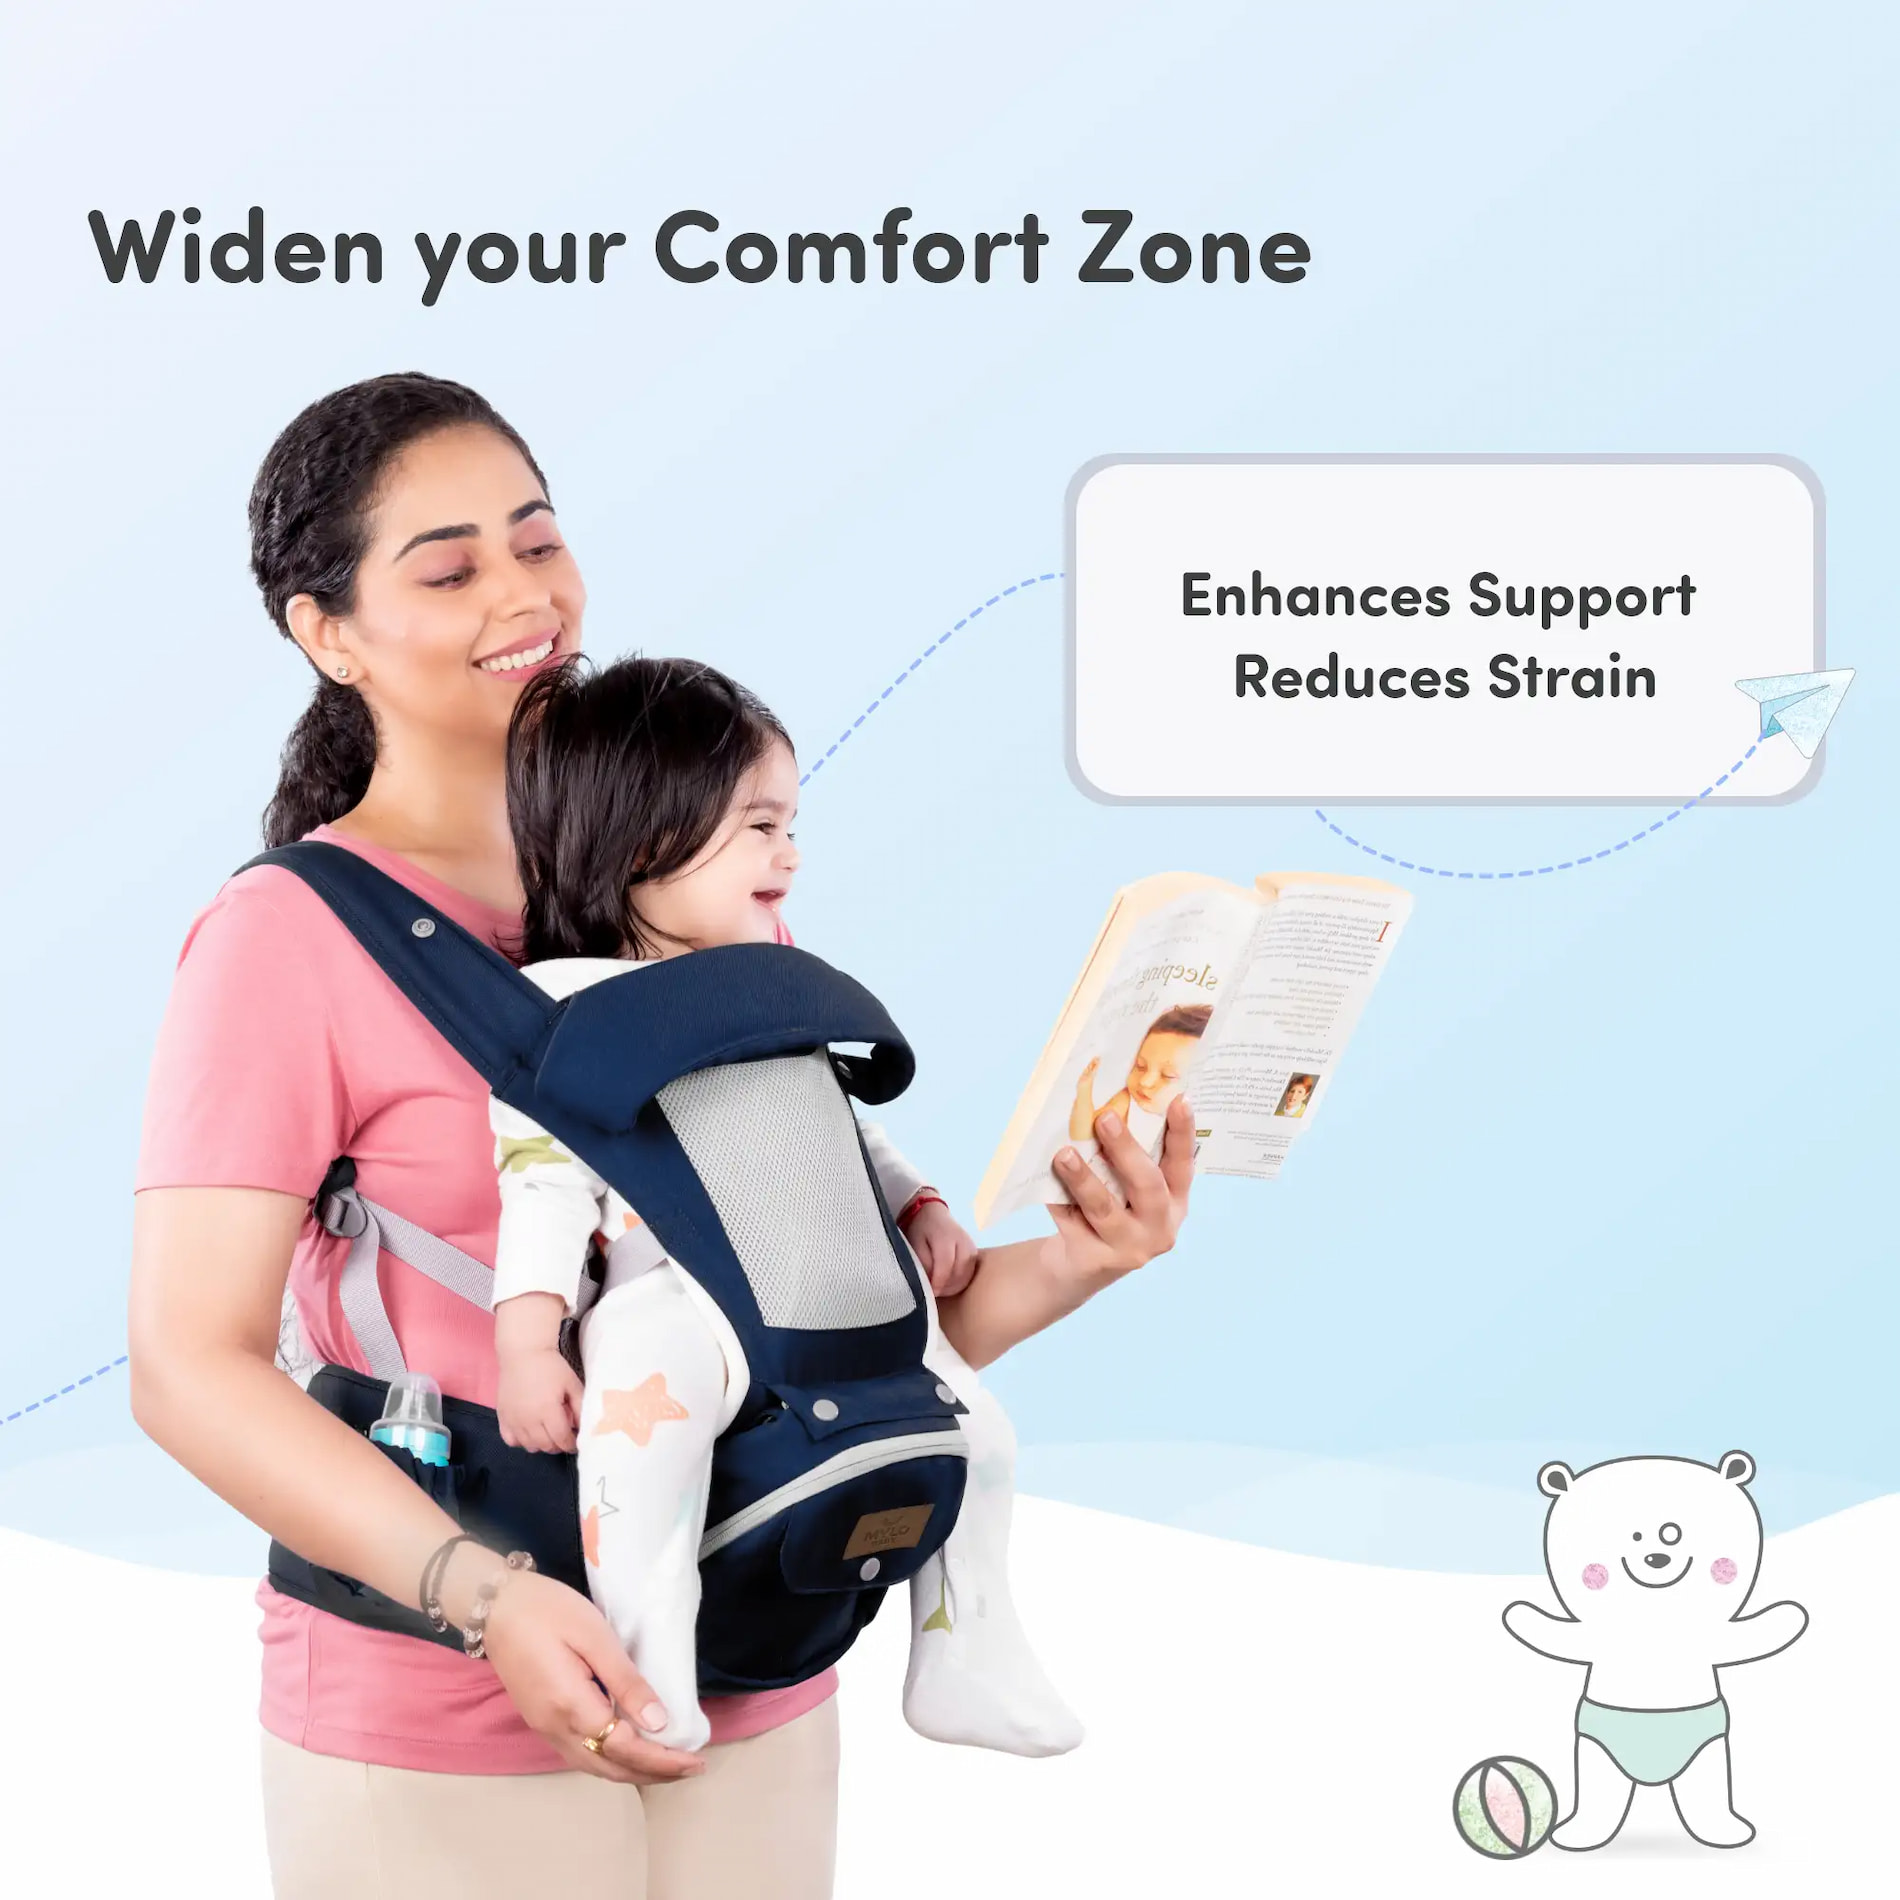 Vista Baby Carrier Bag for 0 to 3 Year Baby with 9 Comfortable Carrying Positions | Wider Waist Belt | Ergonomic Hip Seat | Safety Strap Buckle